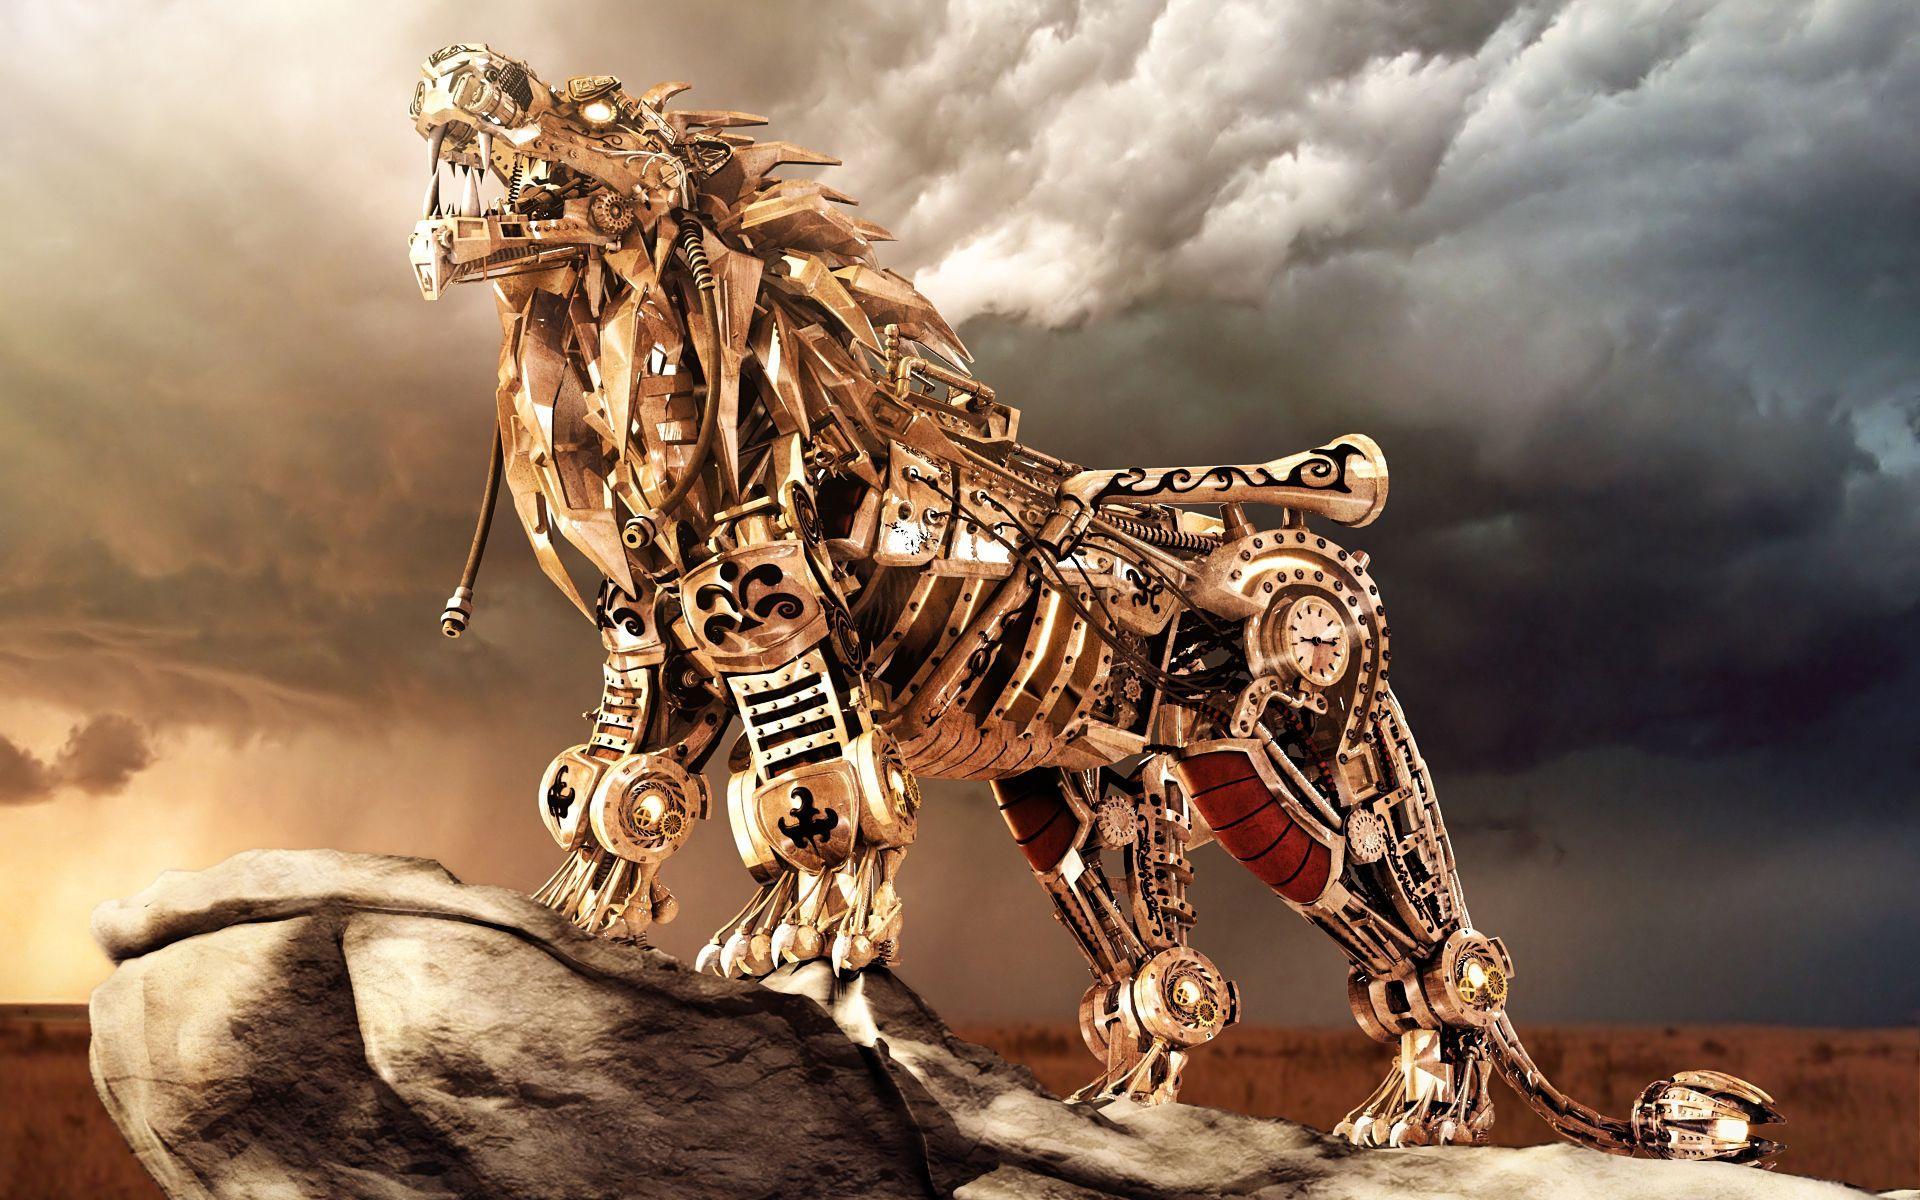 3D Machine Lion Wallpaper. HD 3D and Abstract Wallpaper for Mobile